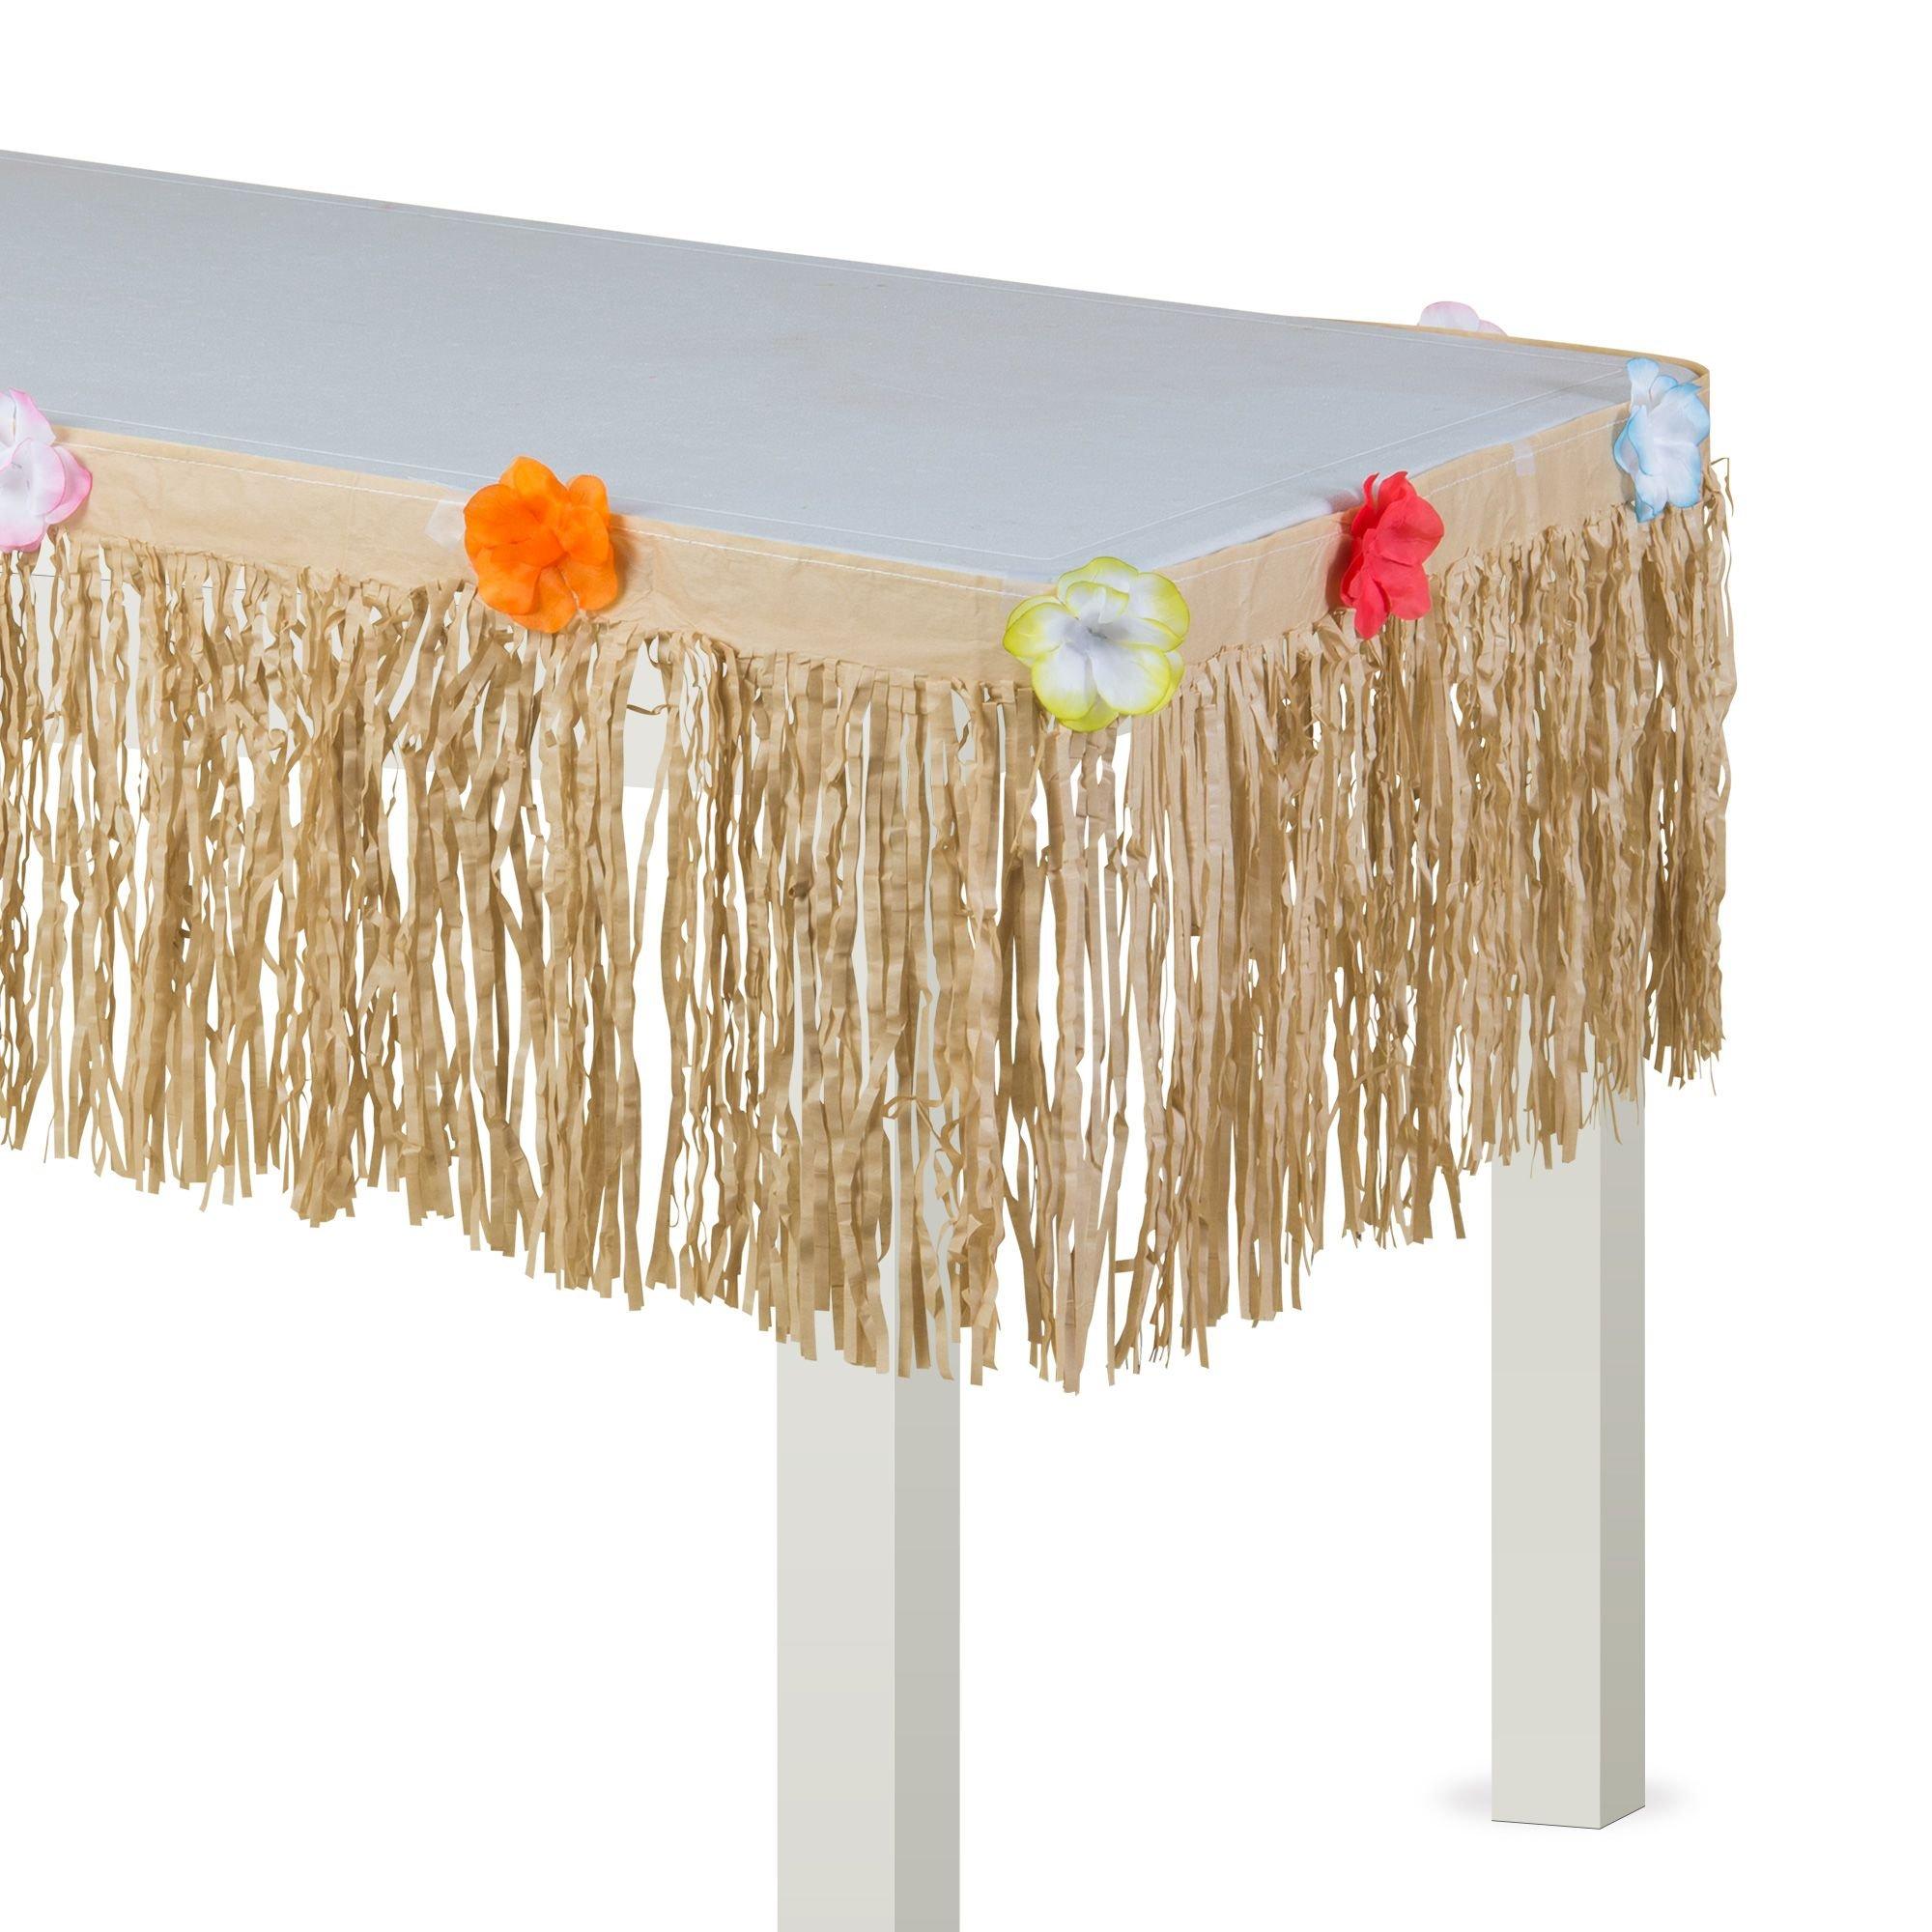 How to Make a Grass Skirt With Crepe Paper